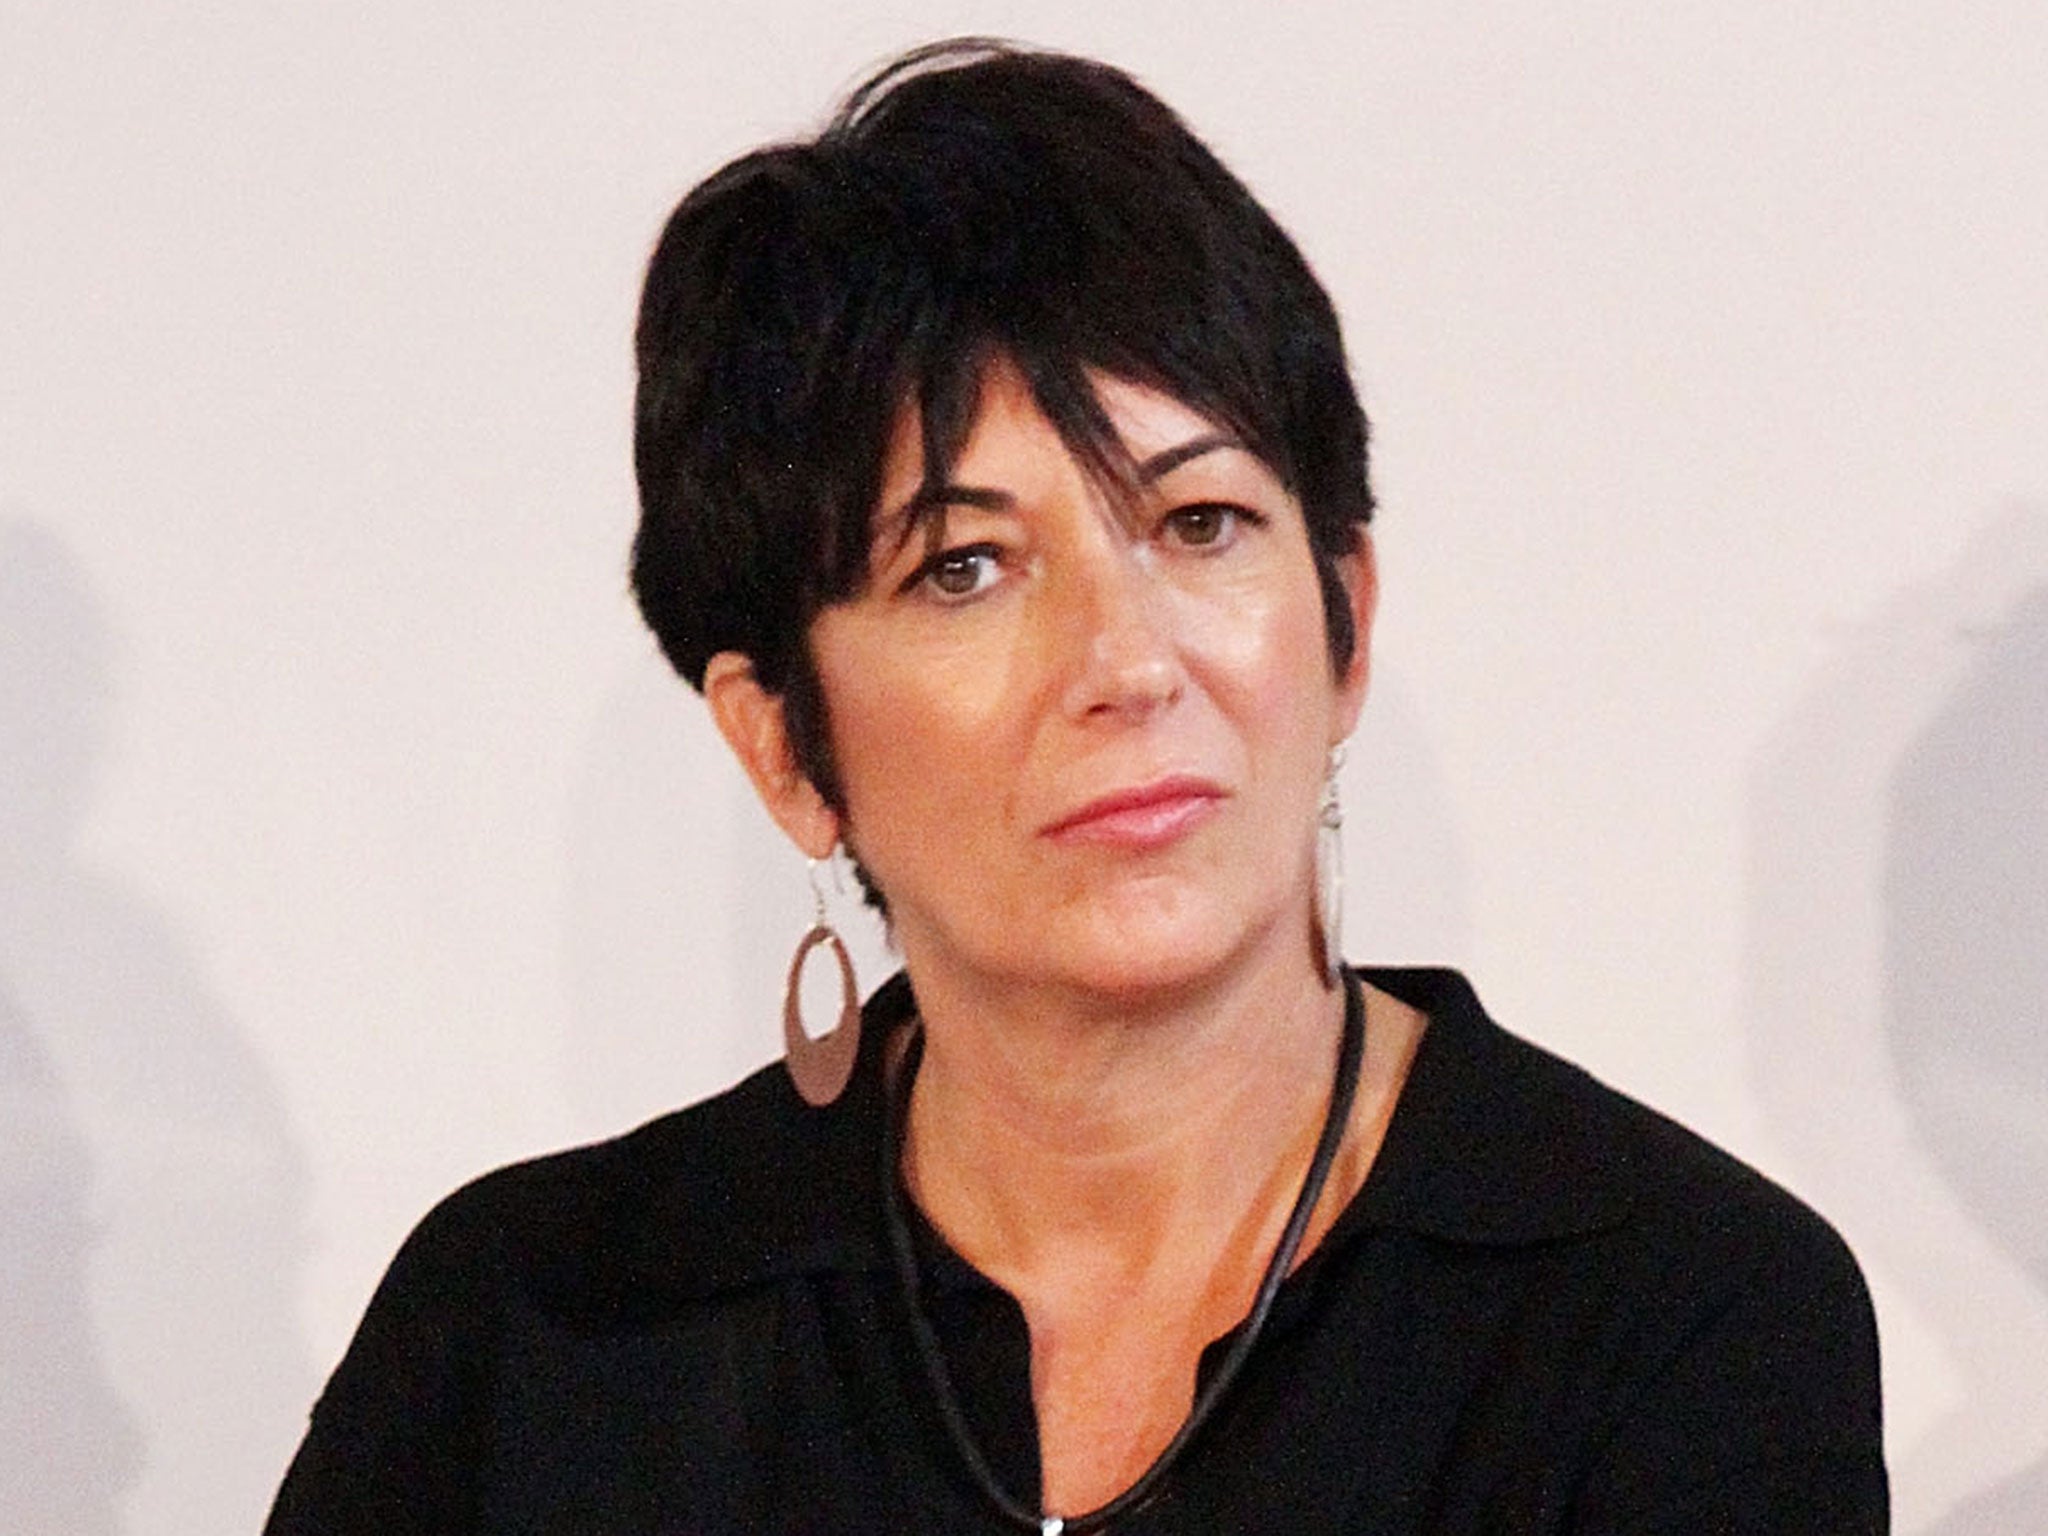 Ghislaine Maxwell is serving two decades in prison for her crimes